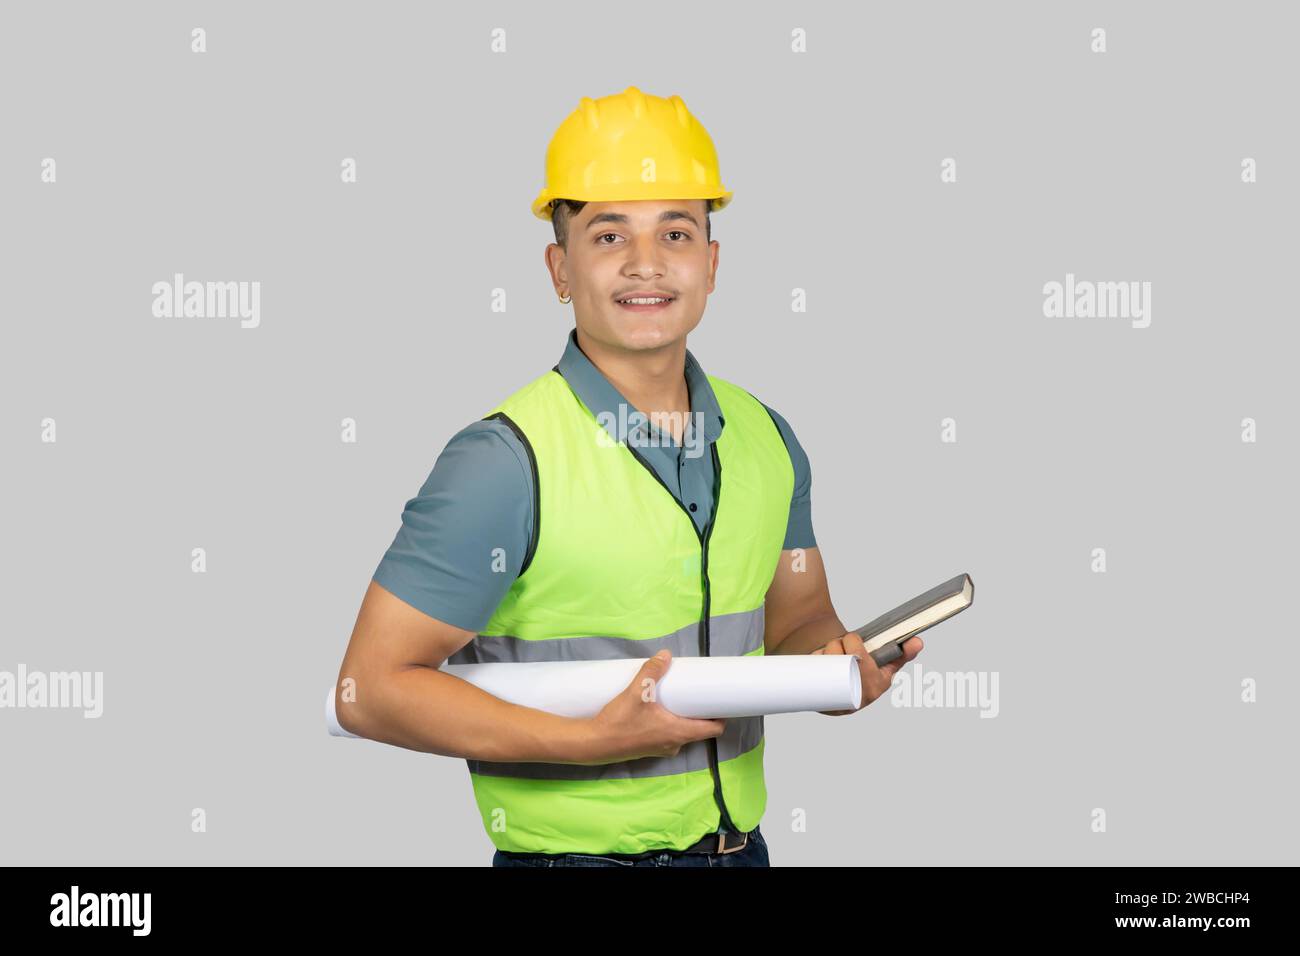 An Asian Happy Construction Worker Engineer giving expression gestures with chartpaper and notebook Stock Photo